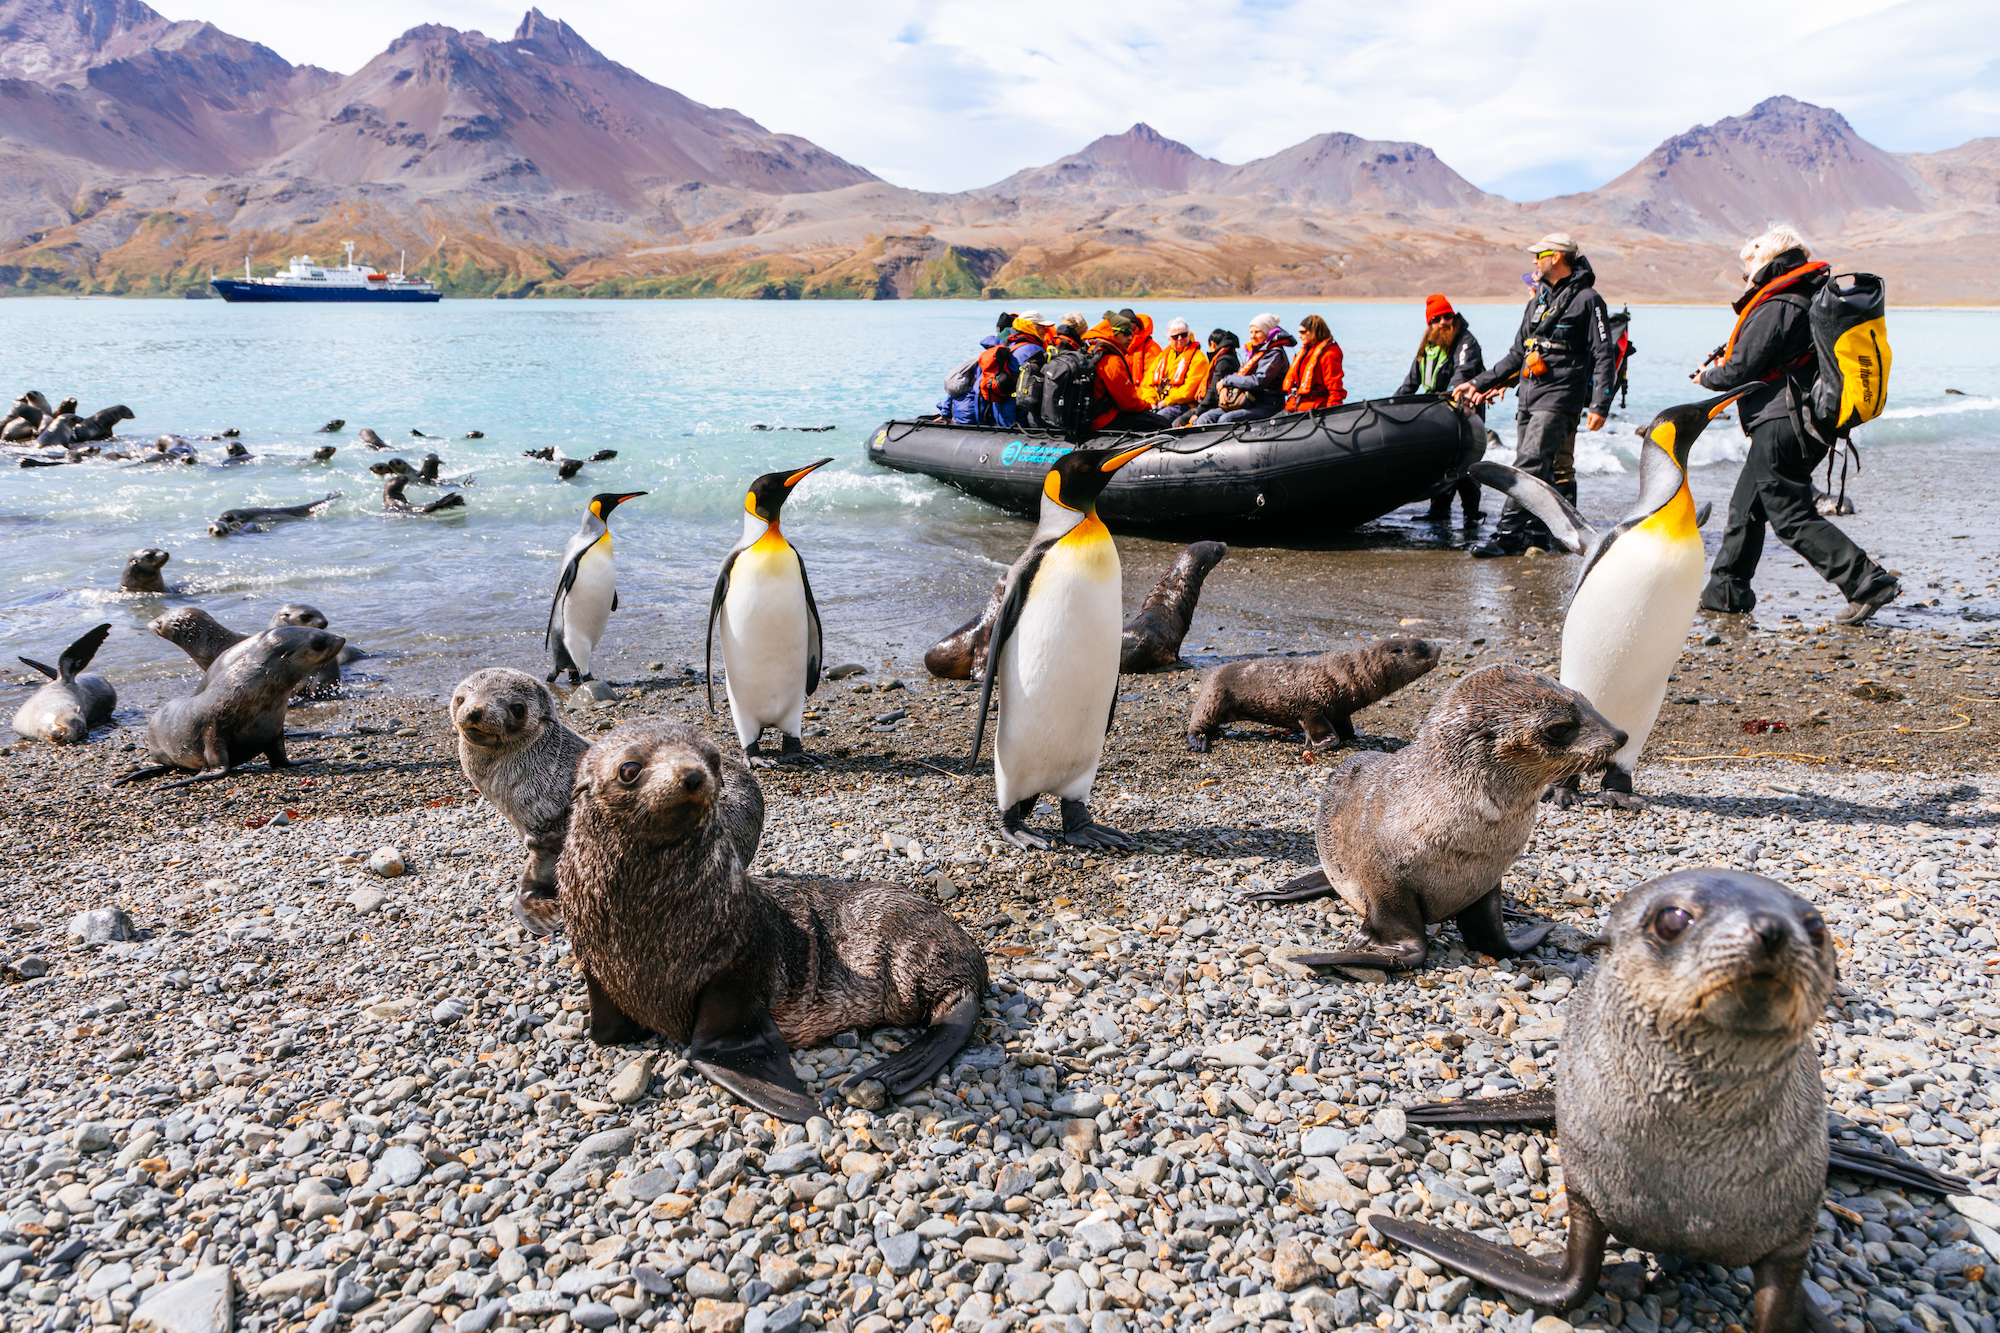 Pictures taken on the 'Falkland Islands - South Georgia - Antarctic Peninsula Cruise by Oceanwide Expeditions